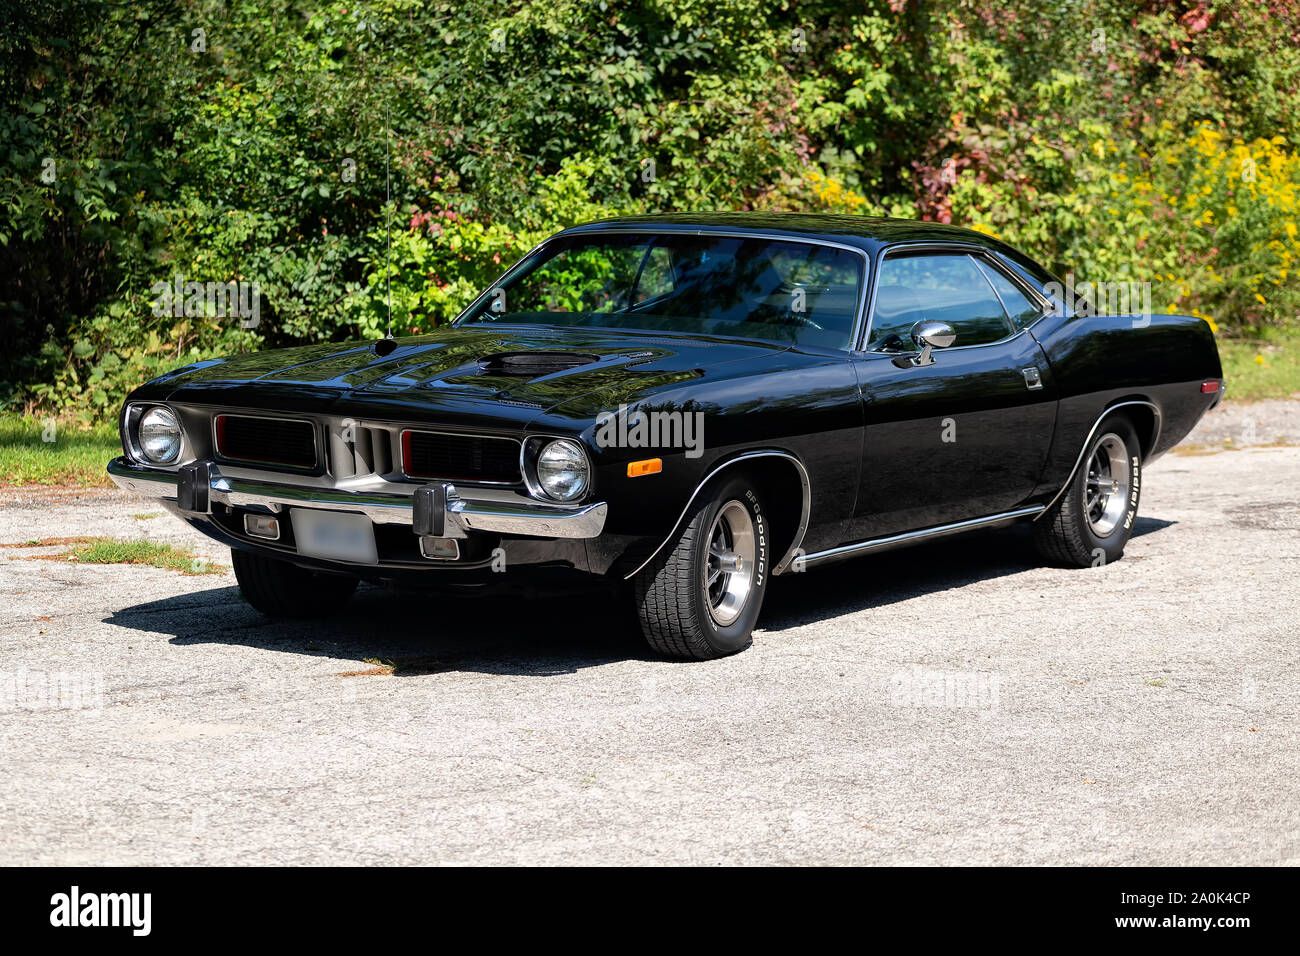 1973 Plymouth Barracuda on Pavement Stock Photo